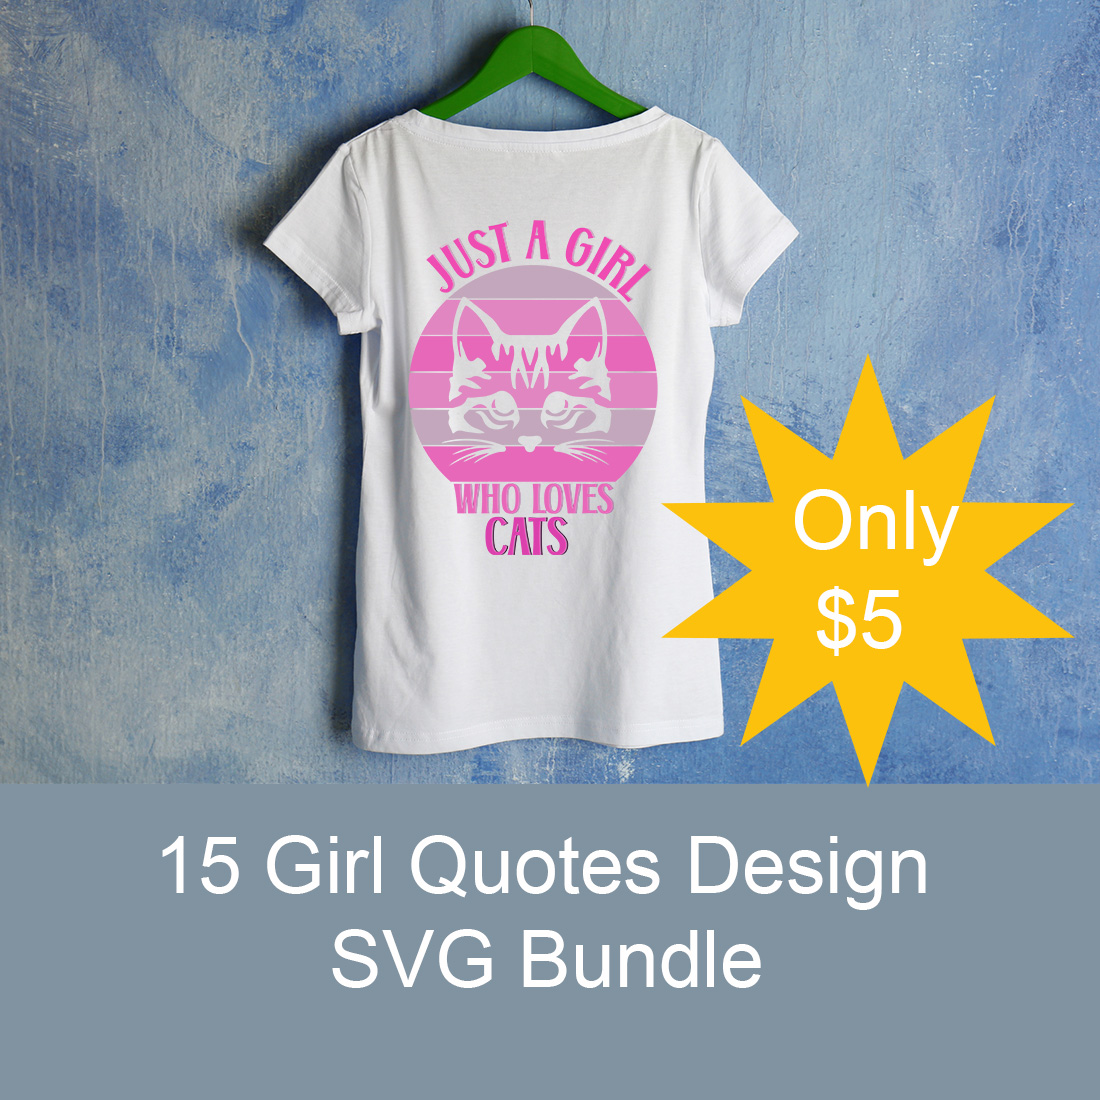 15 Girl Quotes Design SVG Bundle cover image.